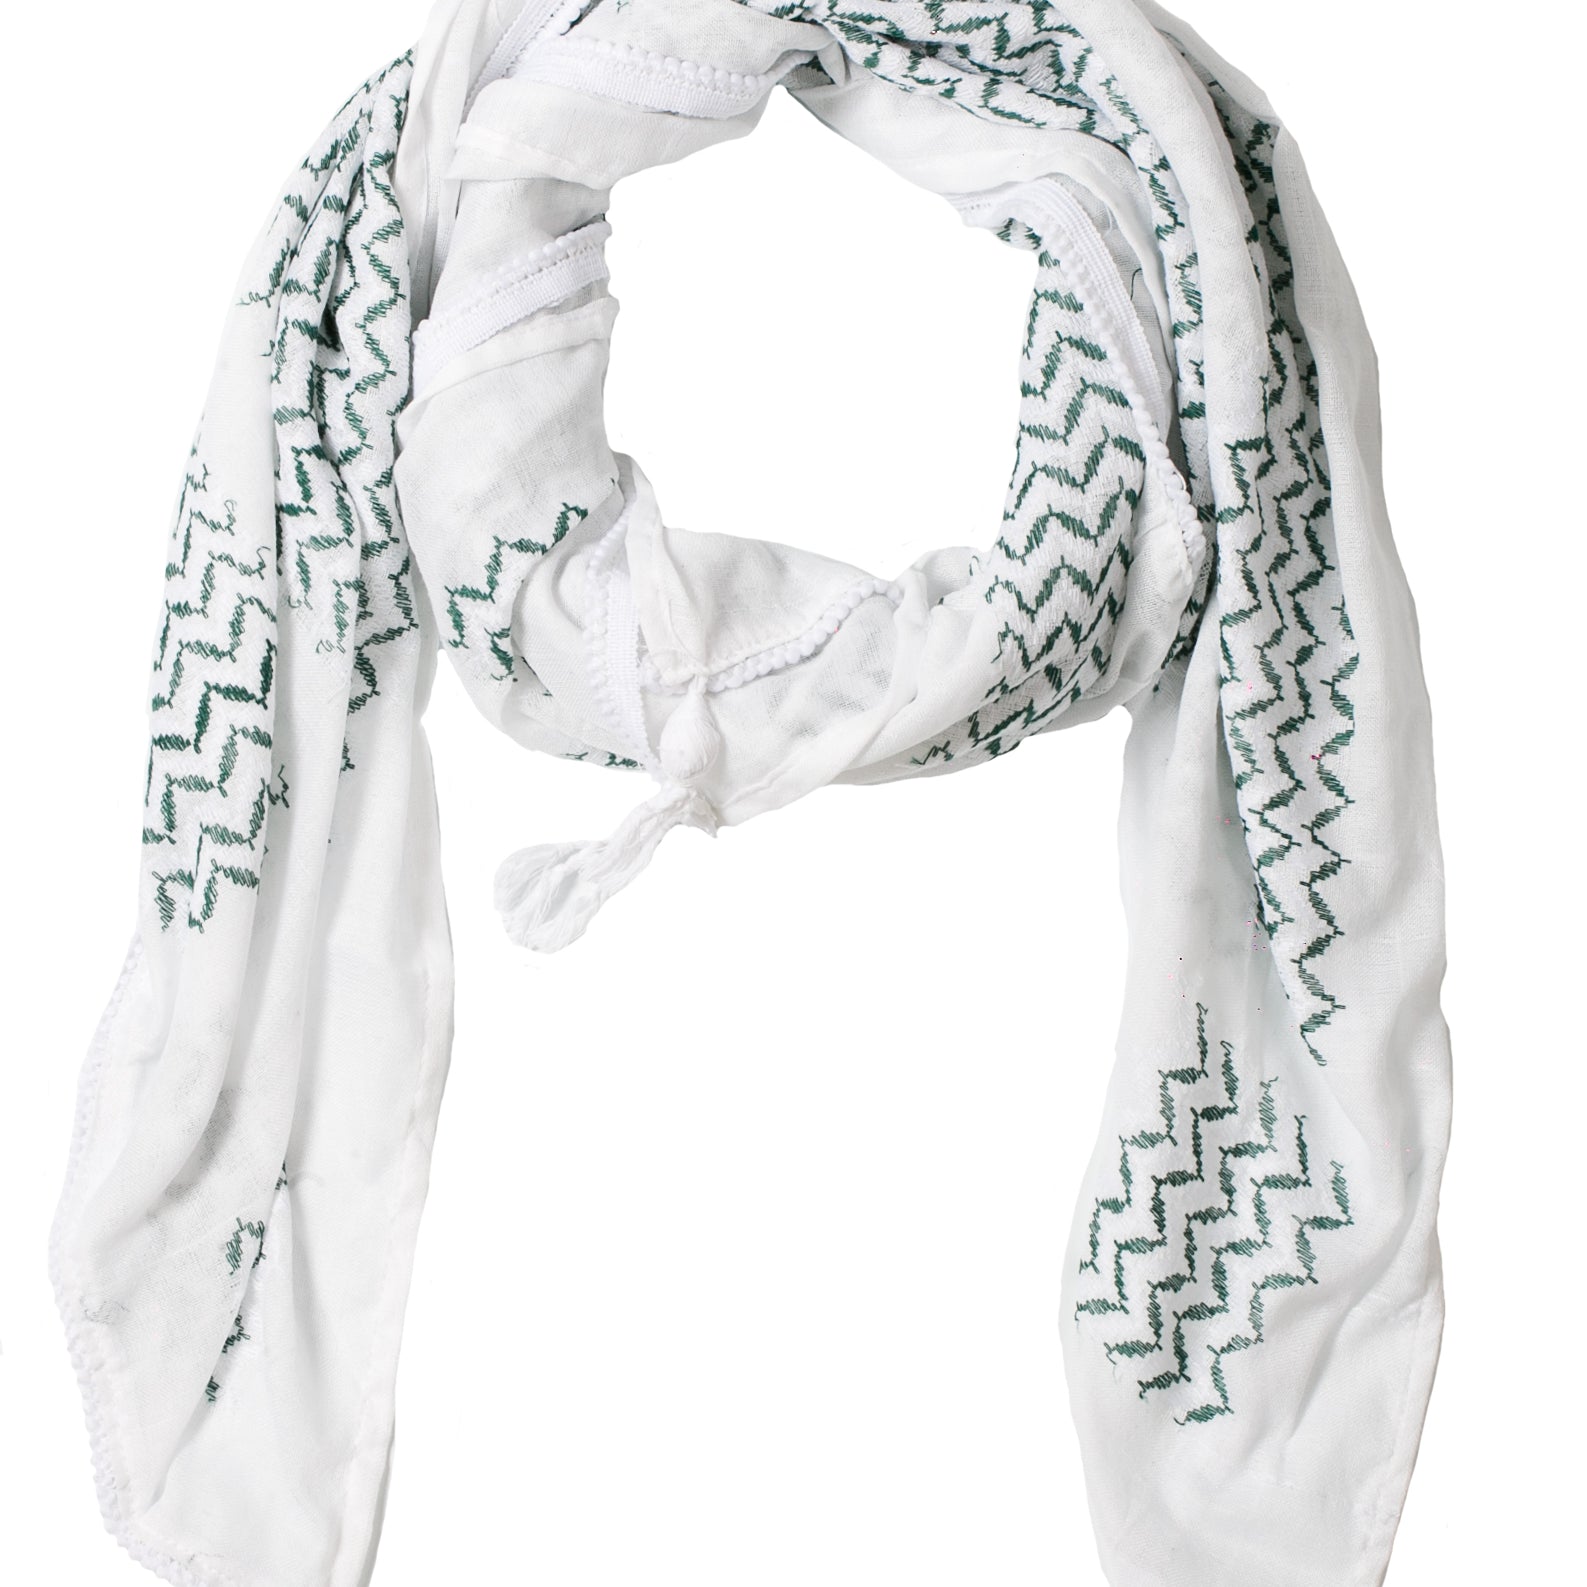 Light white scarf with Olive green pattern by Hirbawi USA